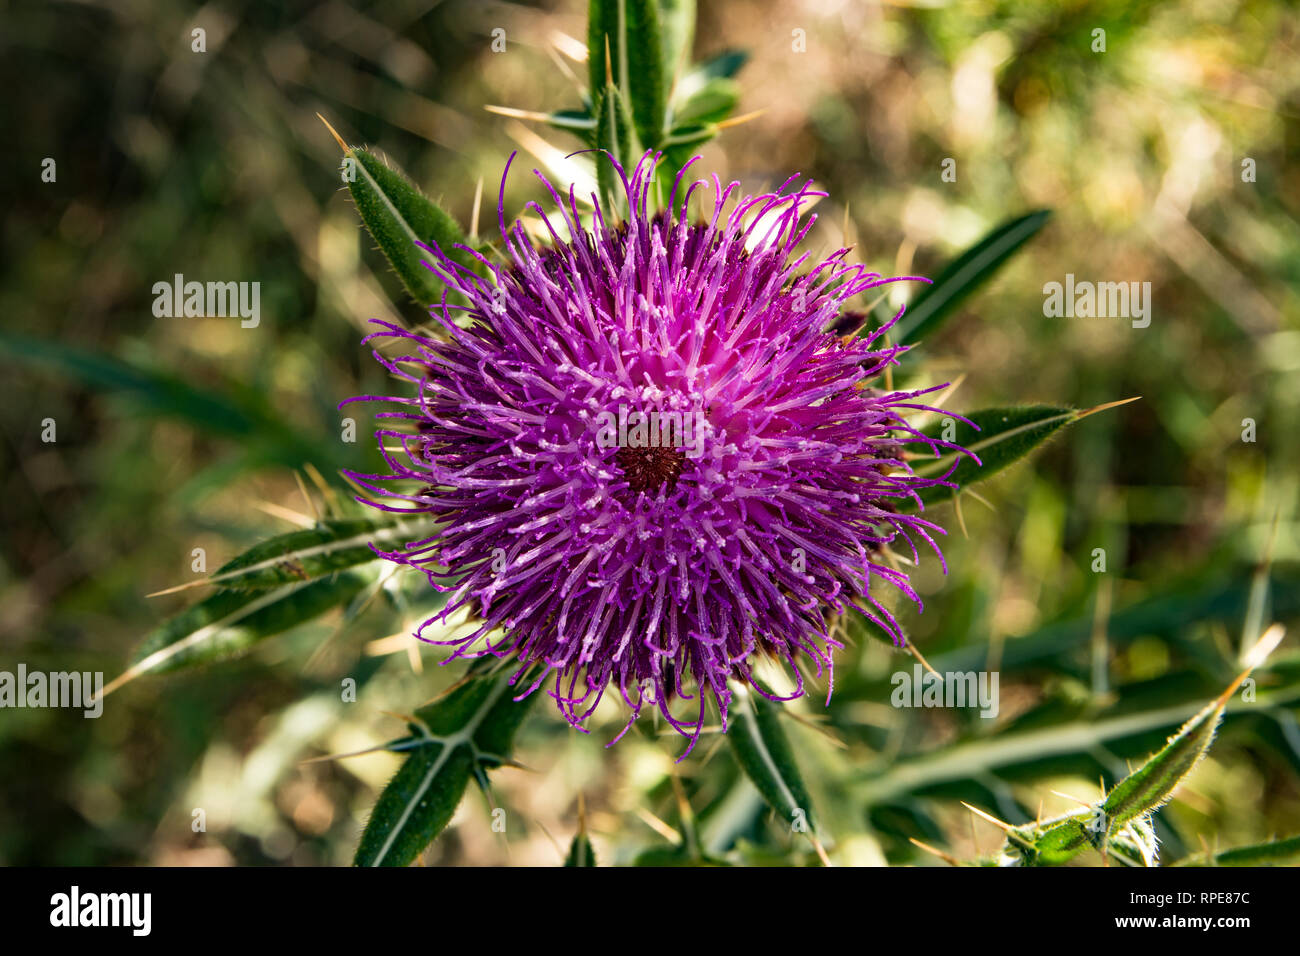 Beautiful wild meadow flower, purple and pink color, Flower is know as Carduus Stock Photo